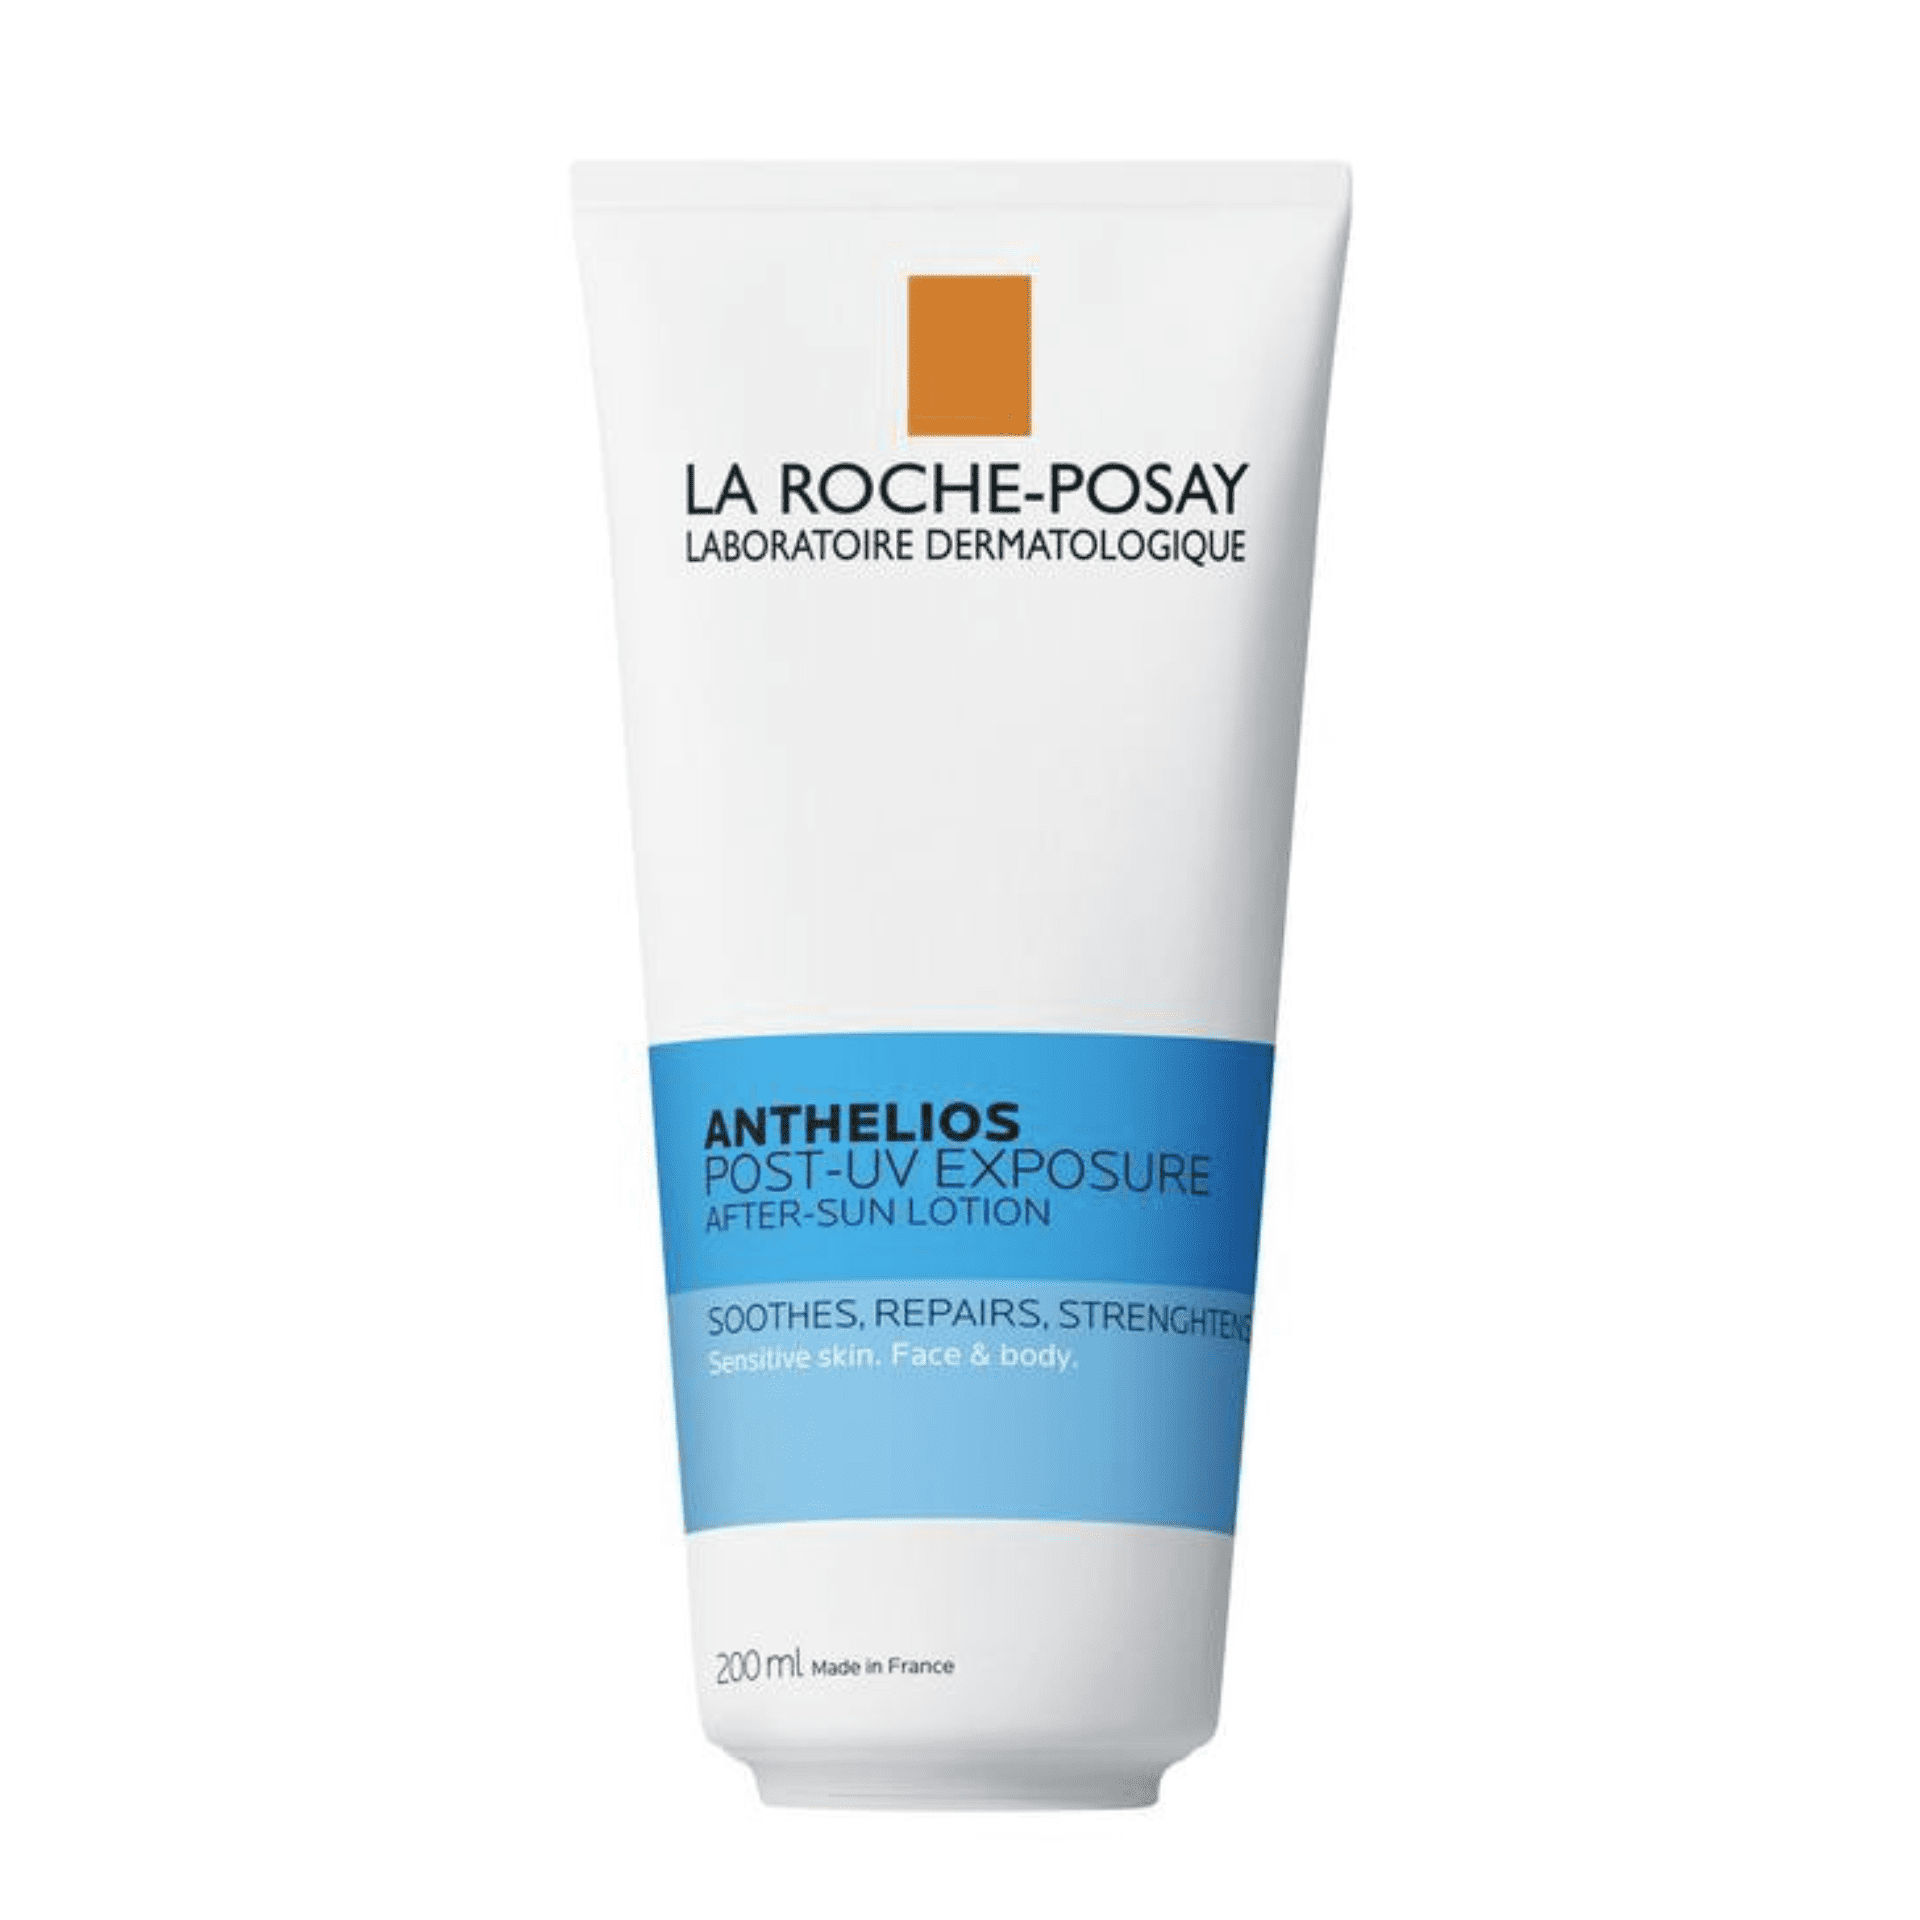 La Roche-Posay Anthelios Aftersun